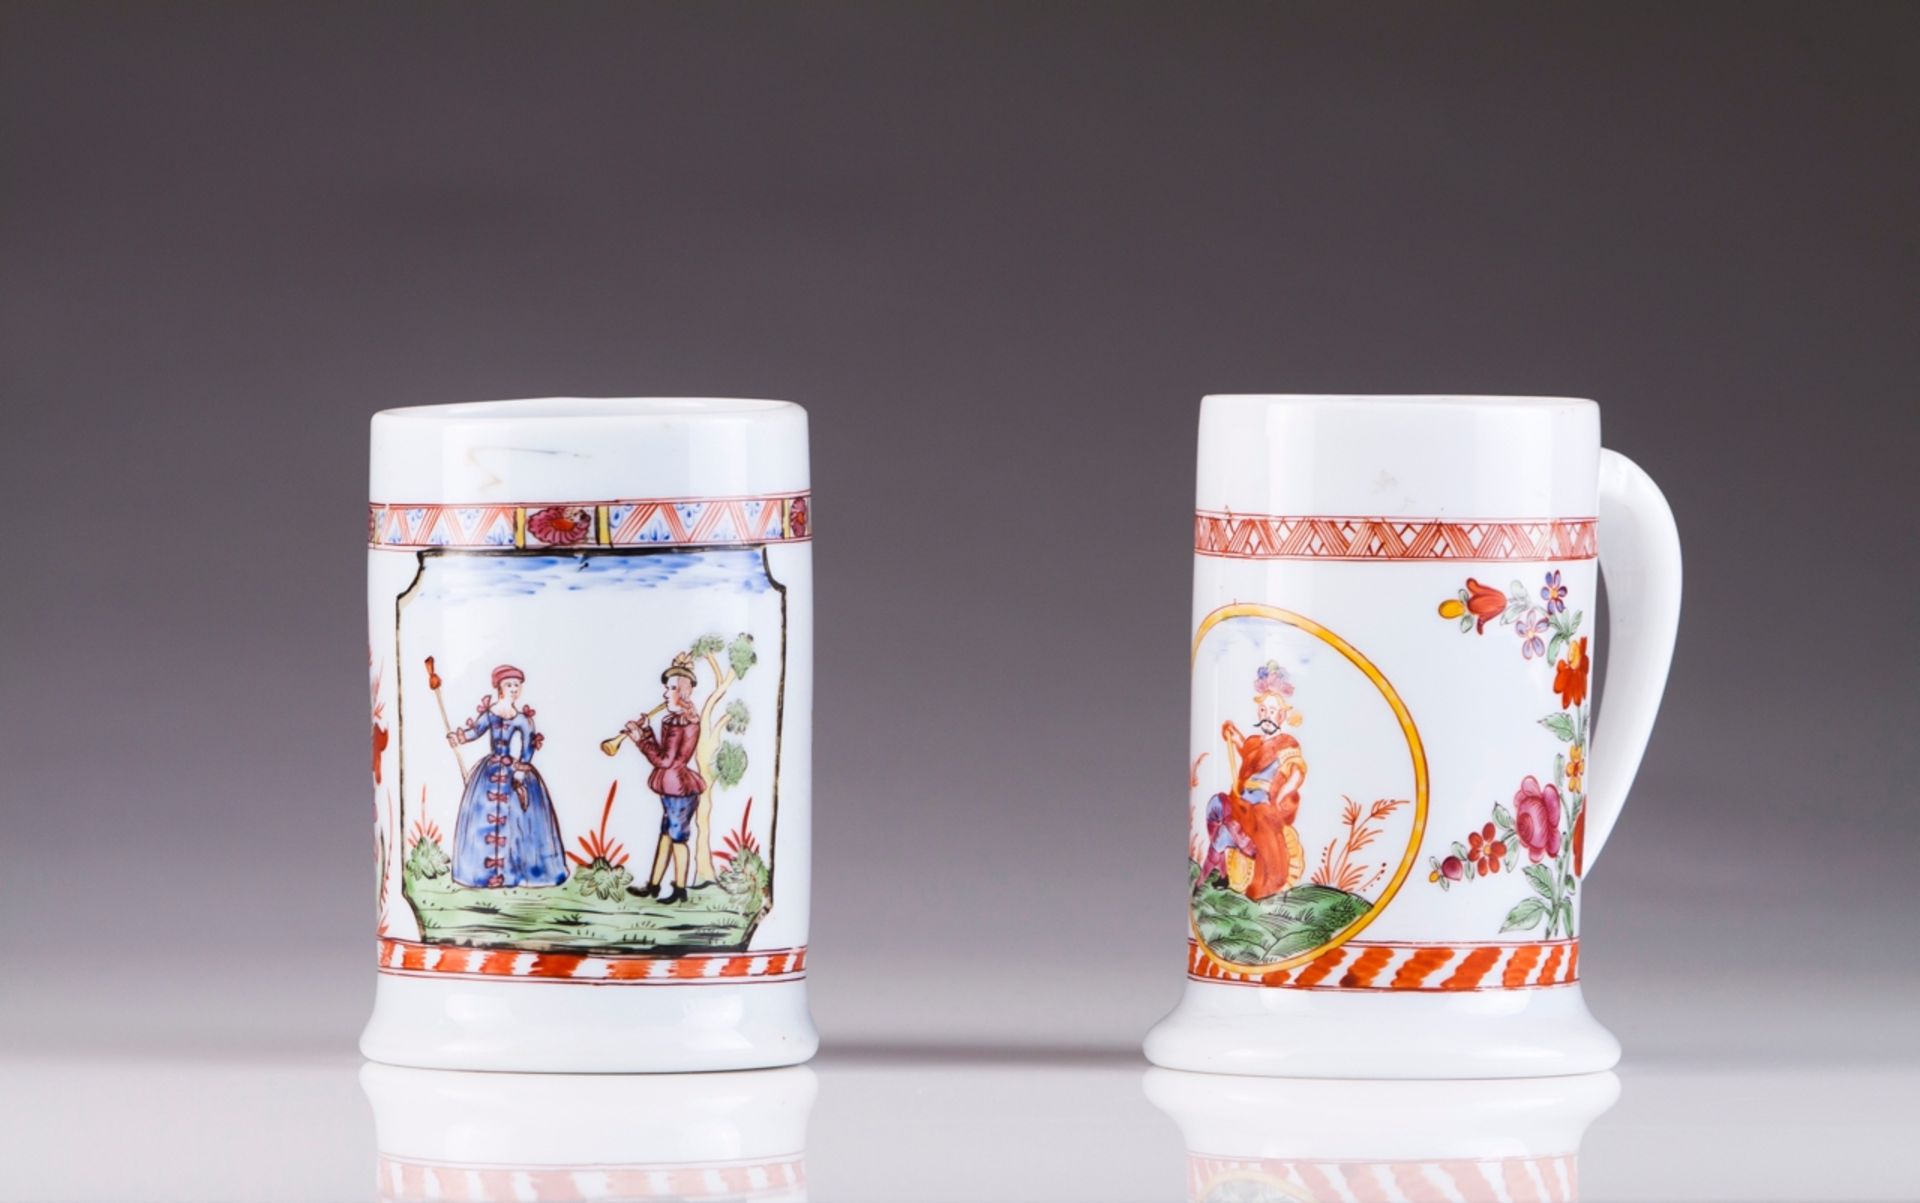 Mug
Painted milk glass
Polychrome decoration with flowers and oriental figure

Height: 16 cm